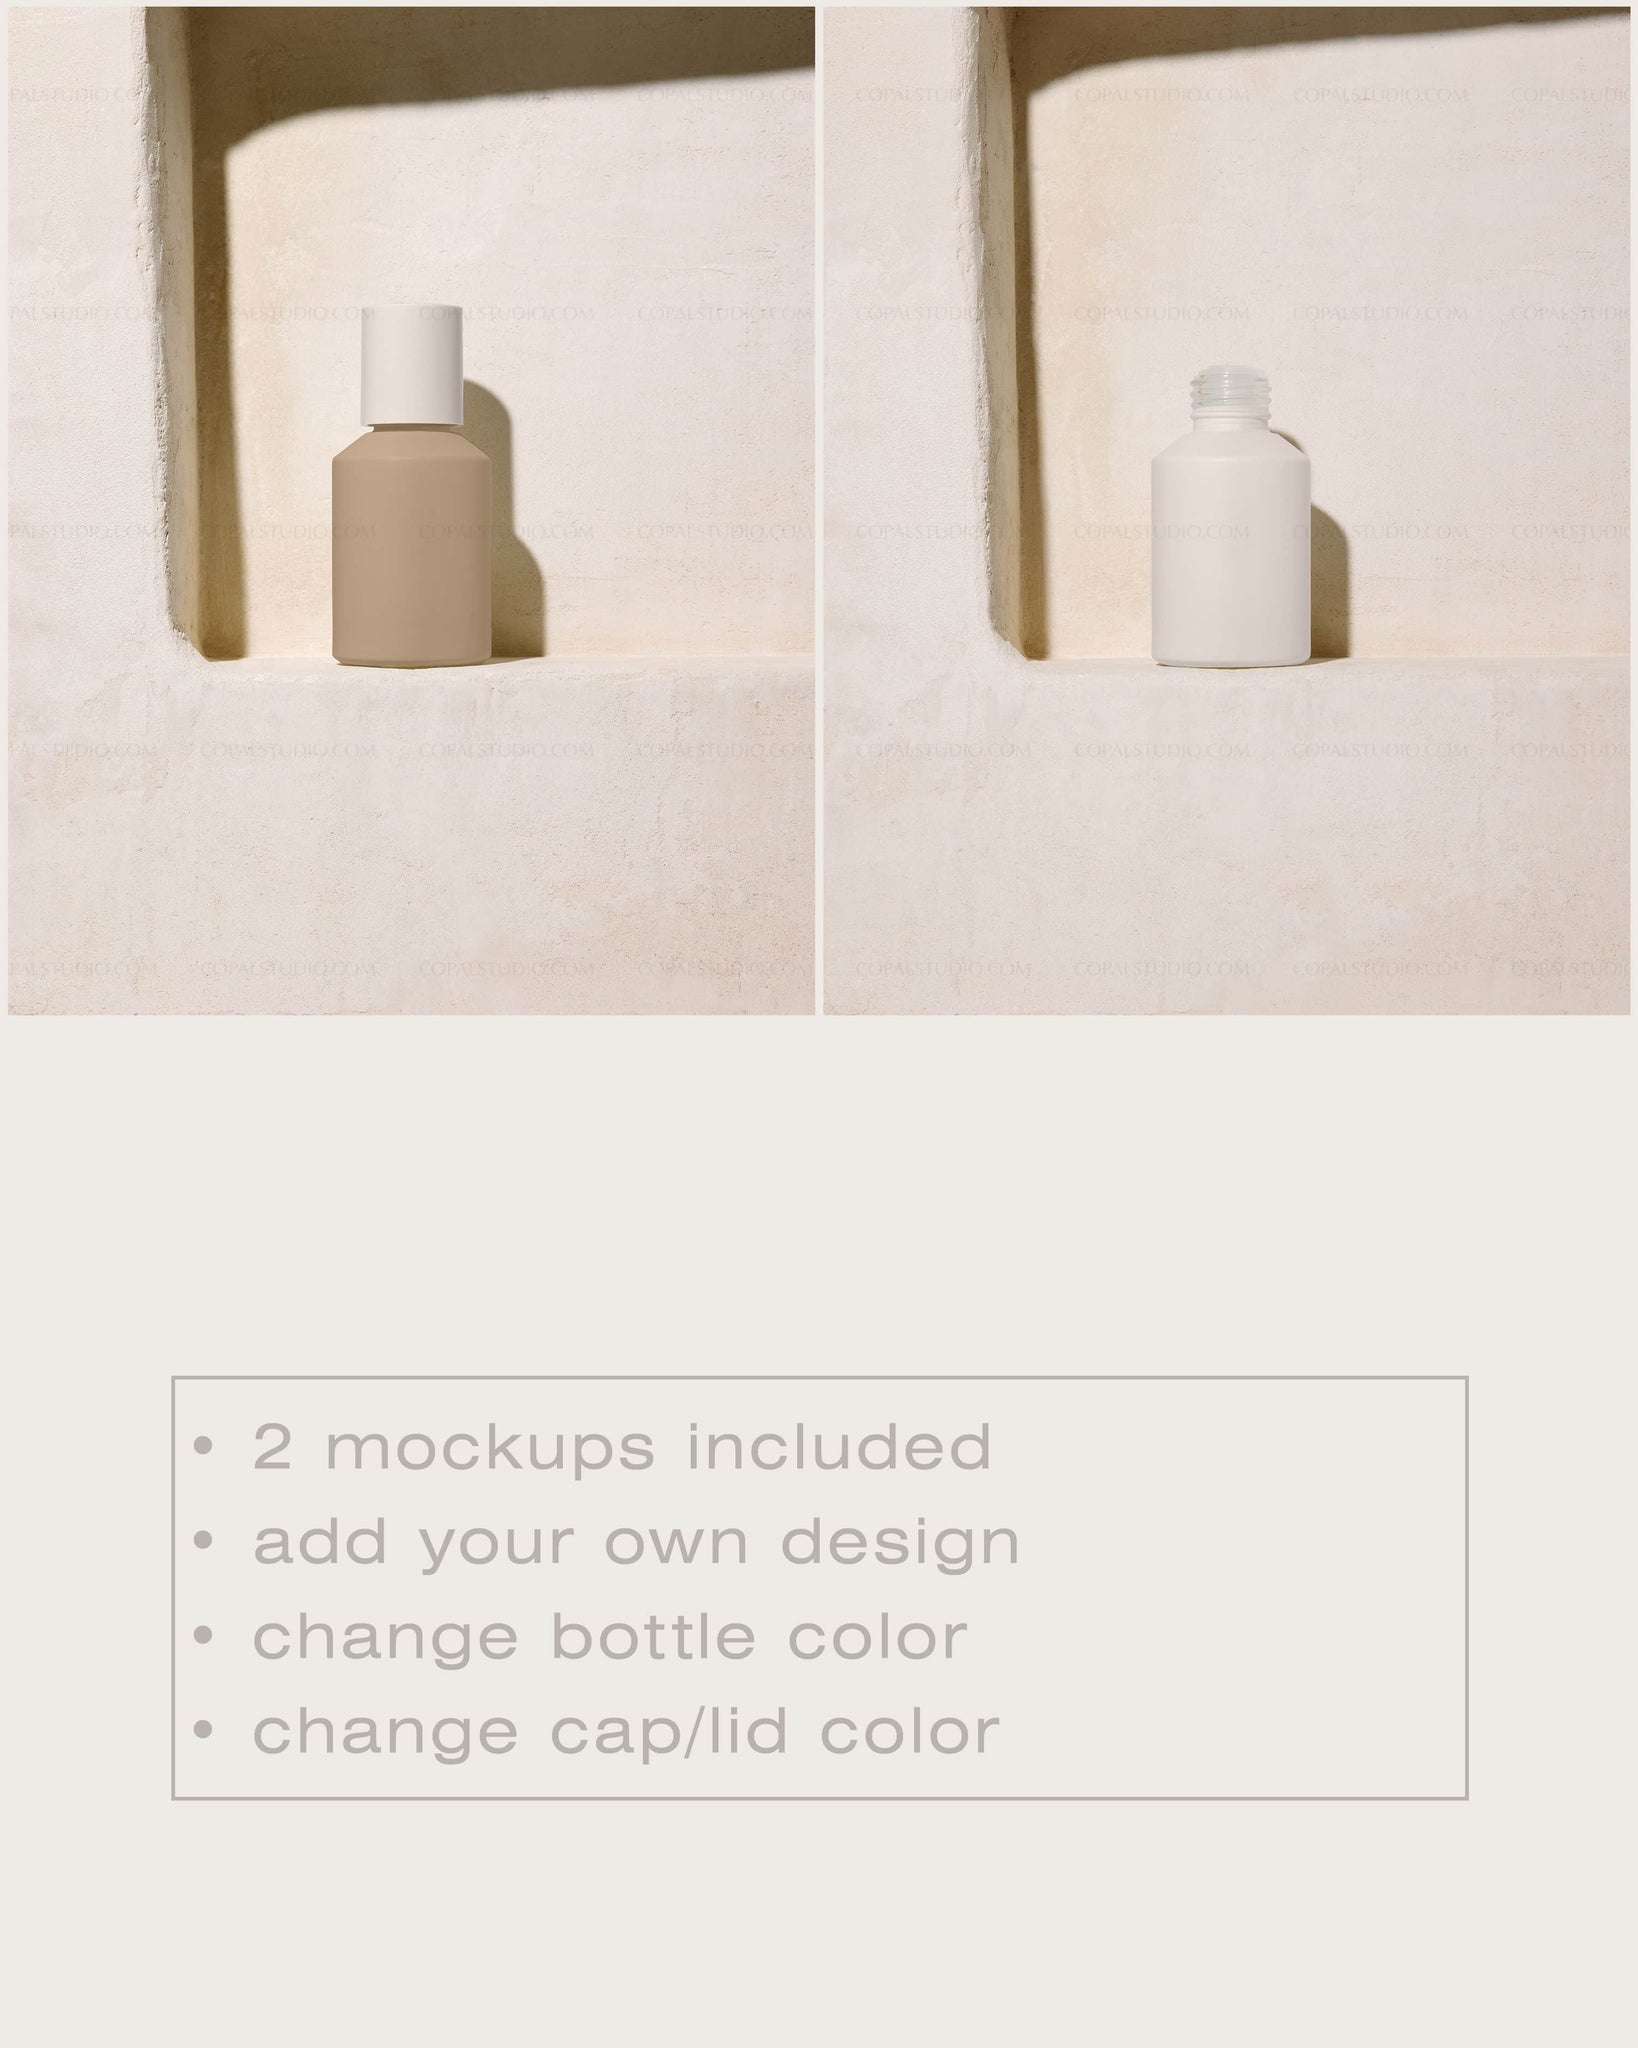 Round Cosmetic Bottle Mockup No. 6 - Copal Studio Packaging Mockups For Designers